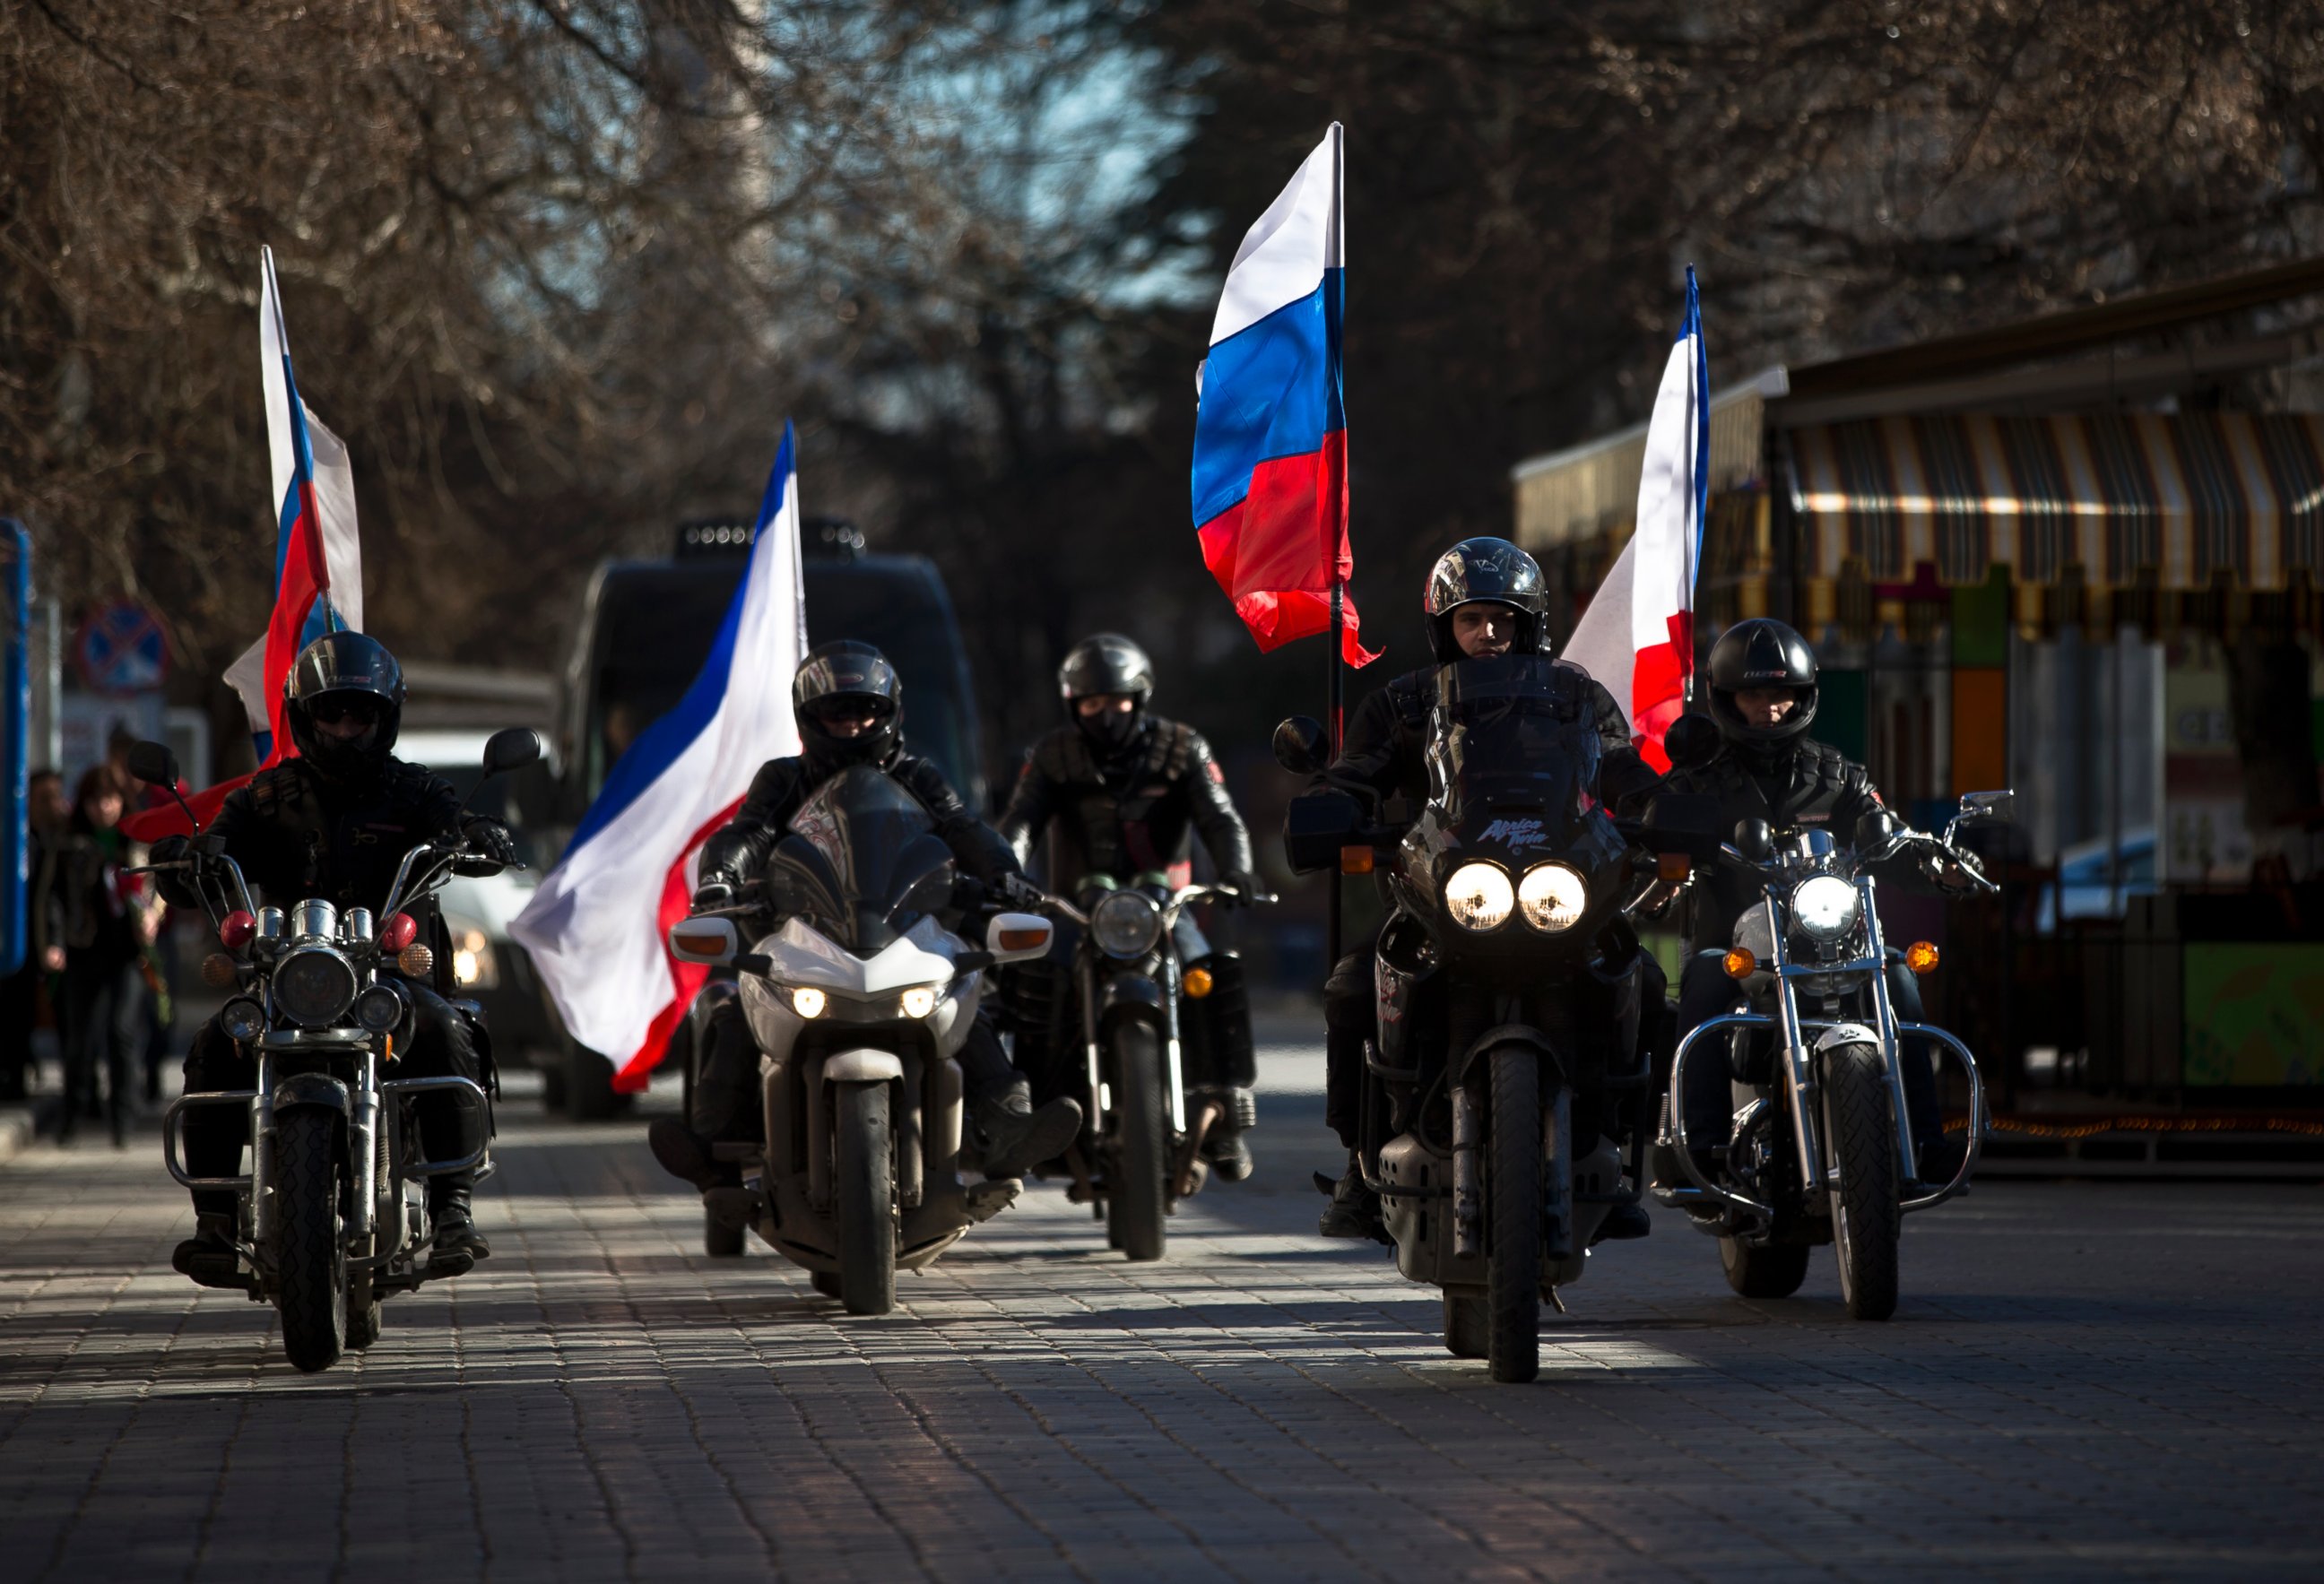 PHOTO: People on motorcycles decorated with Russian and Crimean flags drive in front of a van transporting the coffins  of Ukrainian soldiers during their funeral in Simferopol, Crimea, Saturday, March 22, 2014.